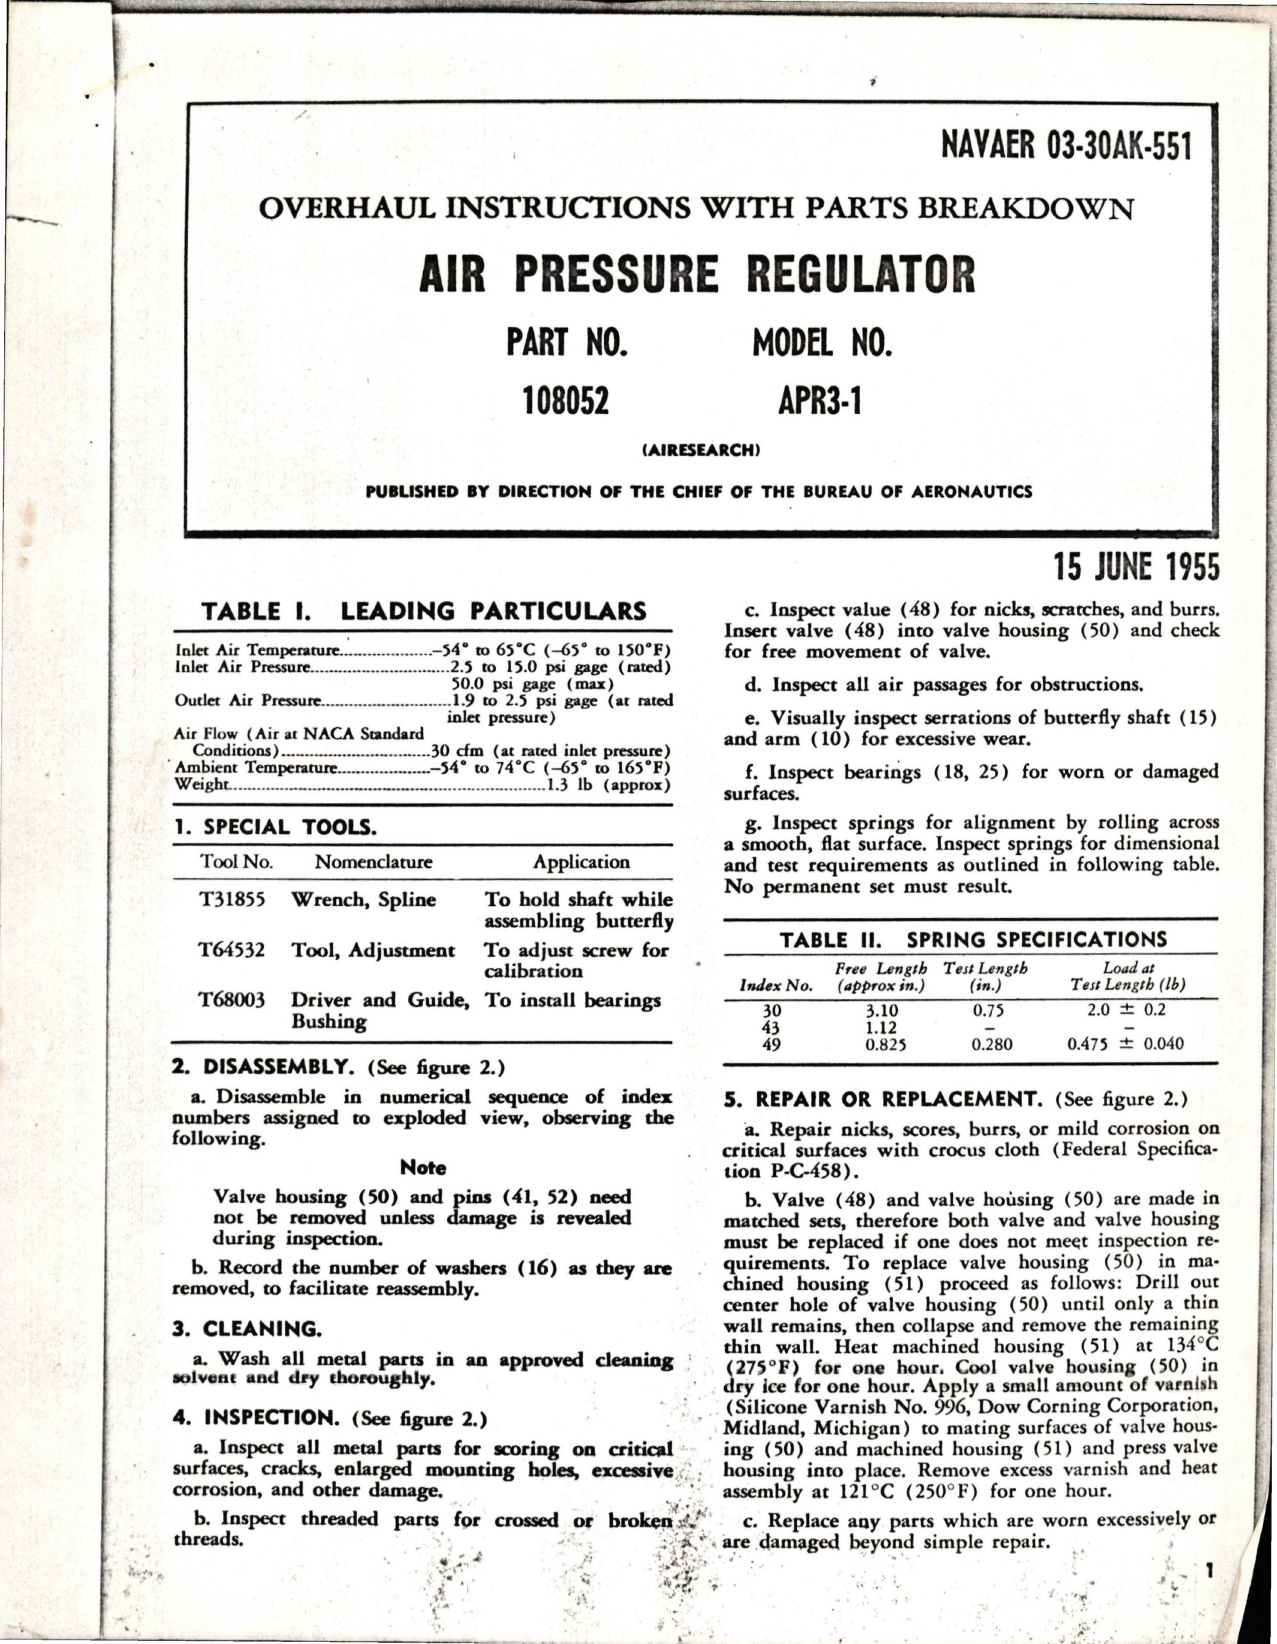 Sample page 1 from AirCorps Library document: Overhaul Instructions with Parts Breakdown for Air Pressure Regulator - Part 108052 - Model APR3-1